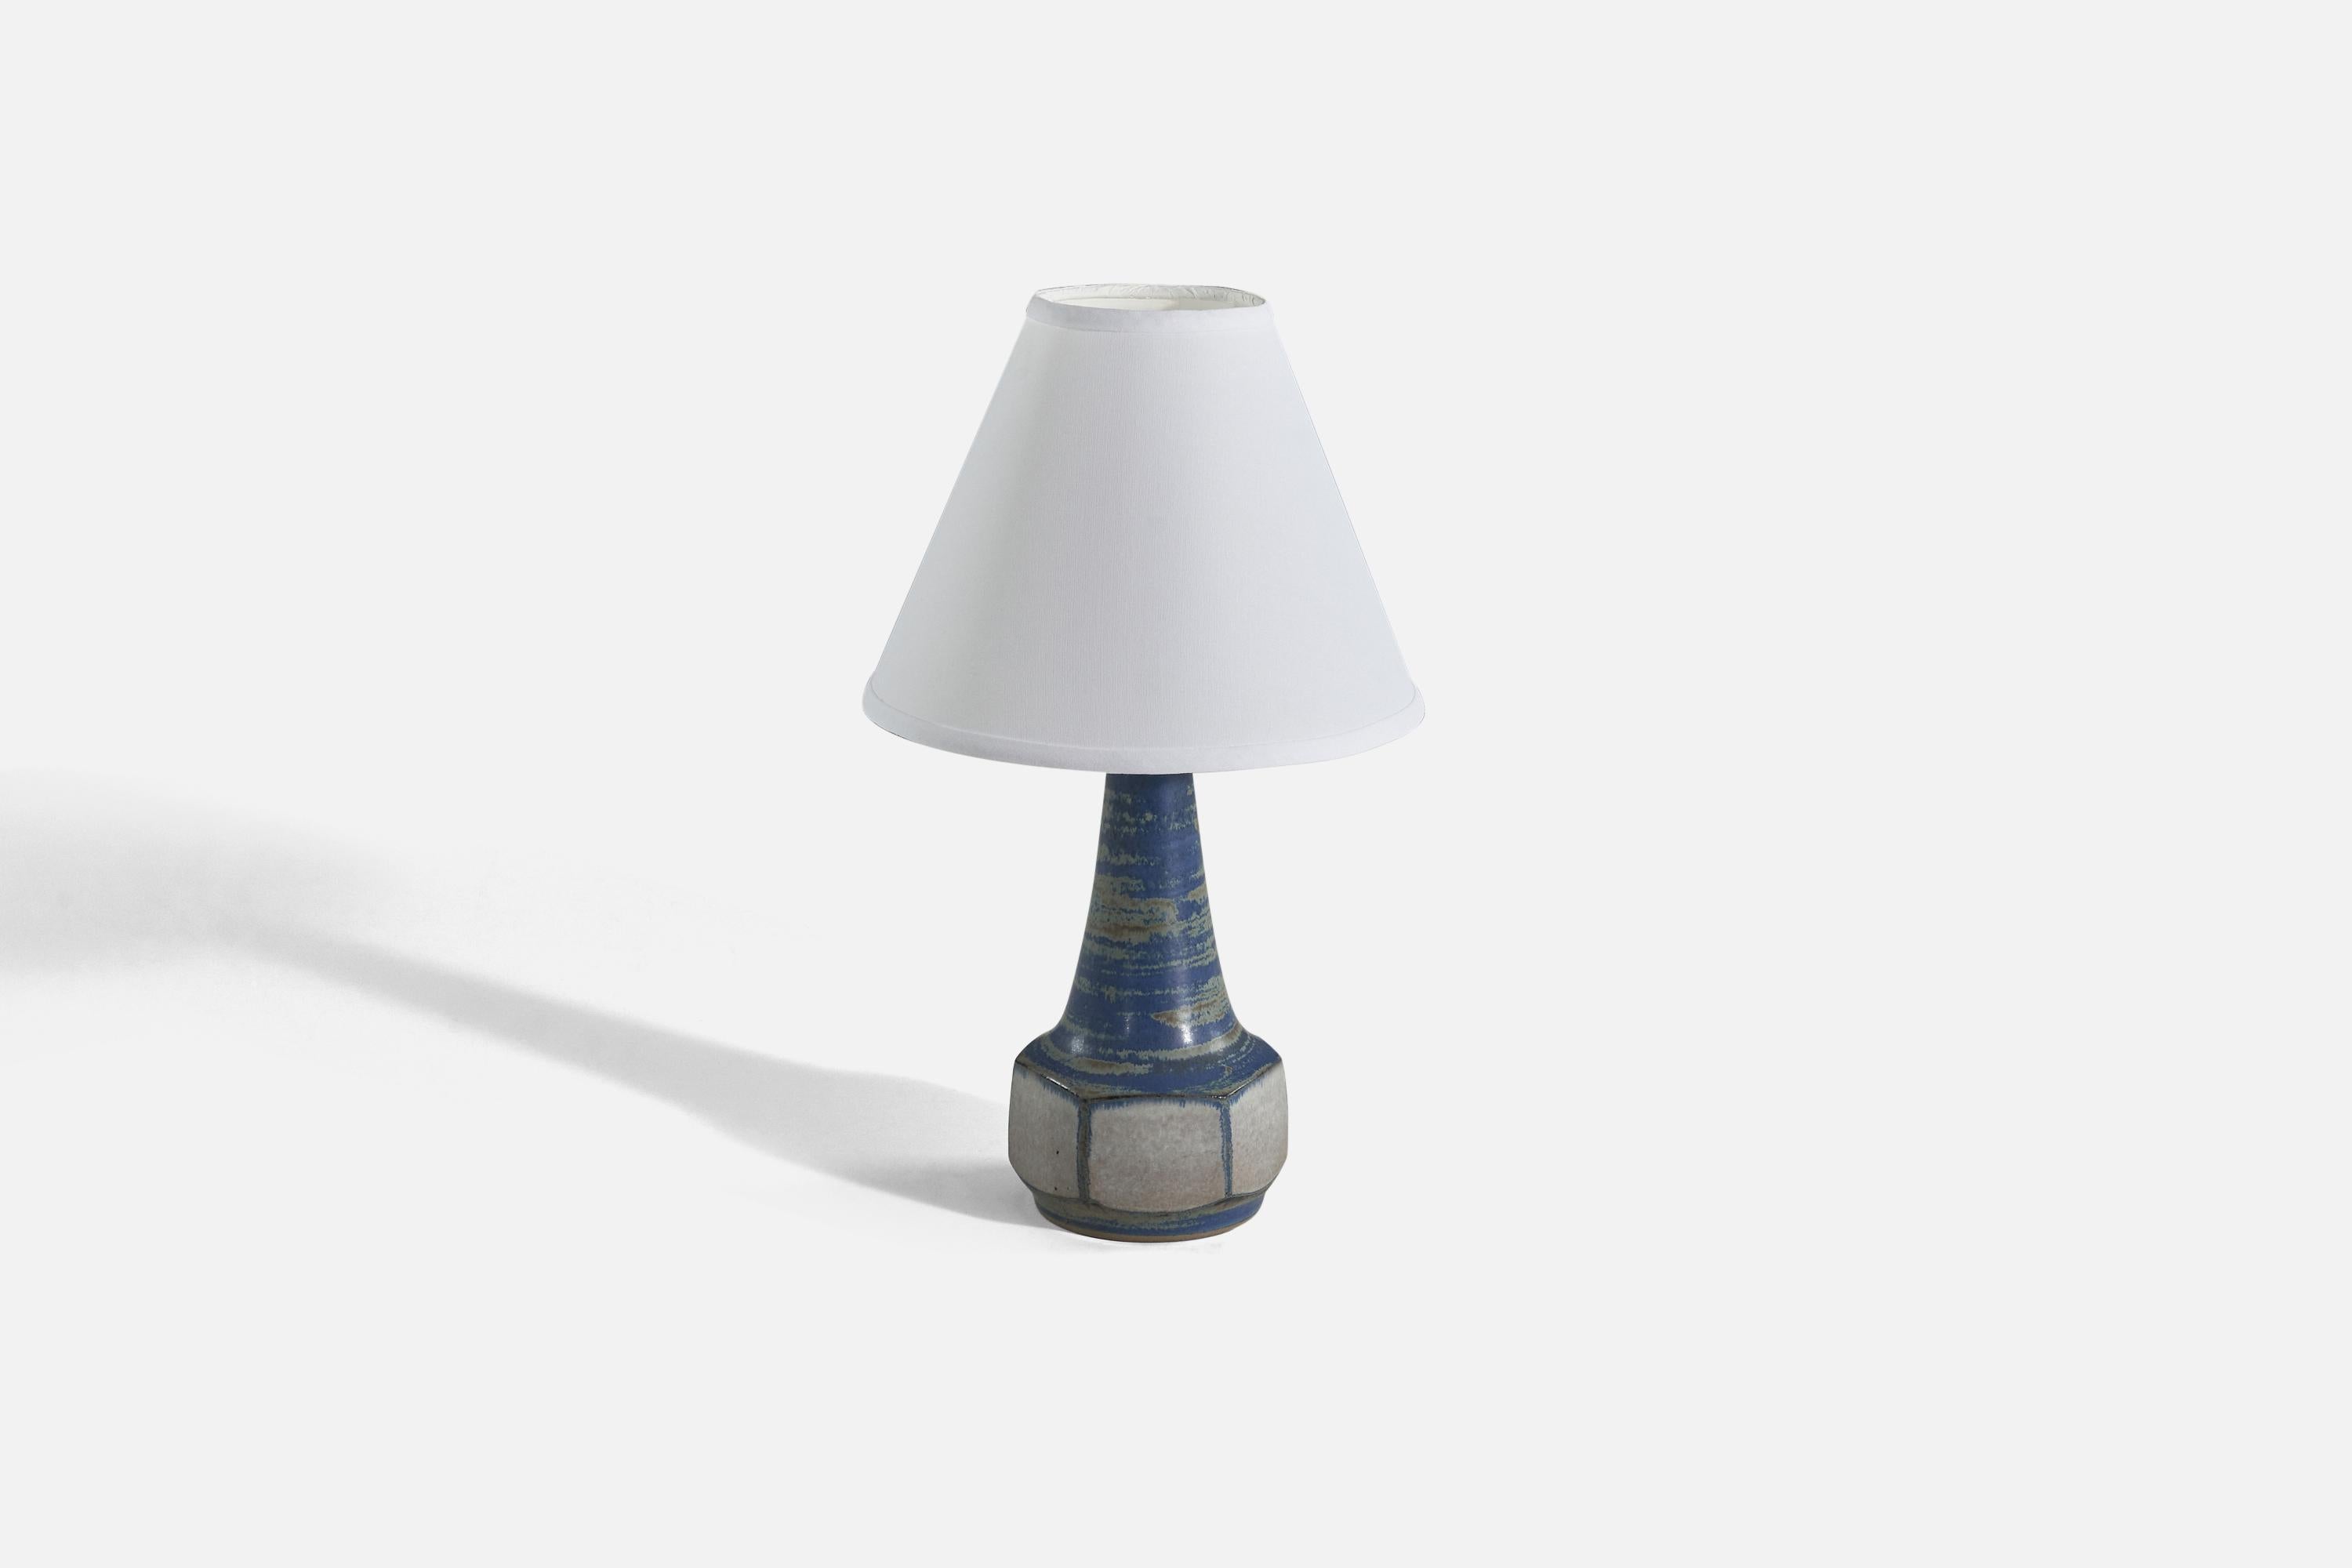 A blue and grey, glazed stoneware table lamp designed by Marianne Starck and produced by Michael Andersen Keramik, Denmark, 1960s. 

Sold without lampshade. 
Dimensions of Lamp (inches) : 11.5 x 5.21 x 4.91 (Height x Width x Depth)
Dimensions of